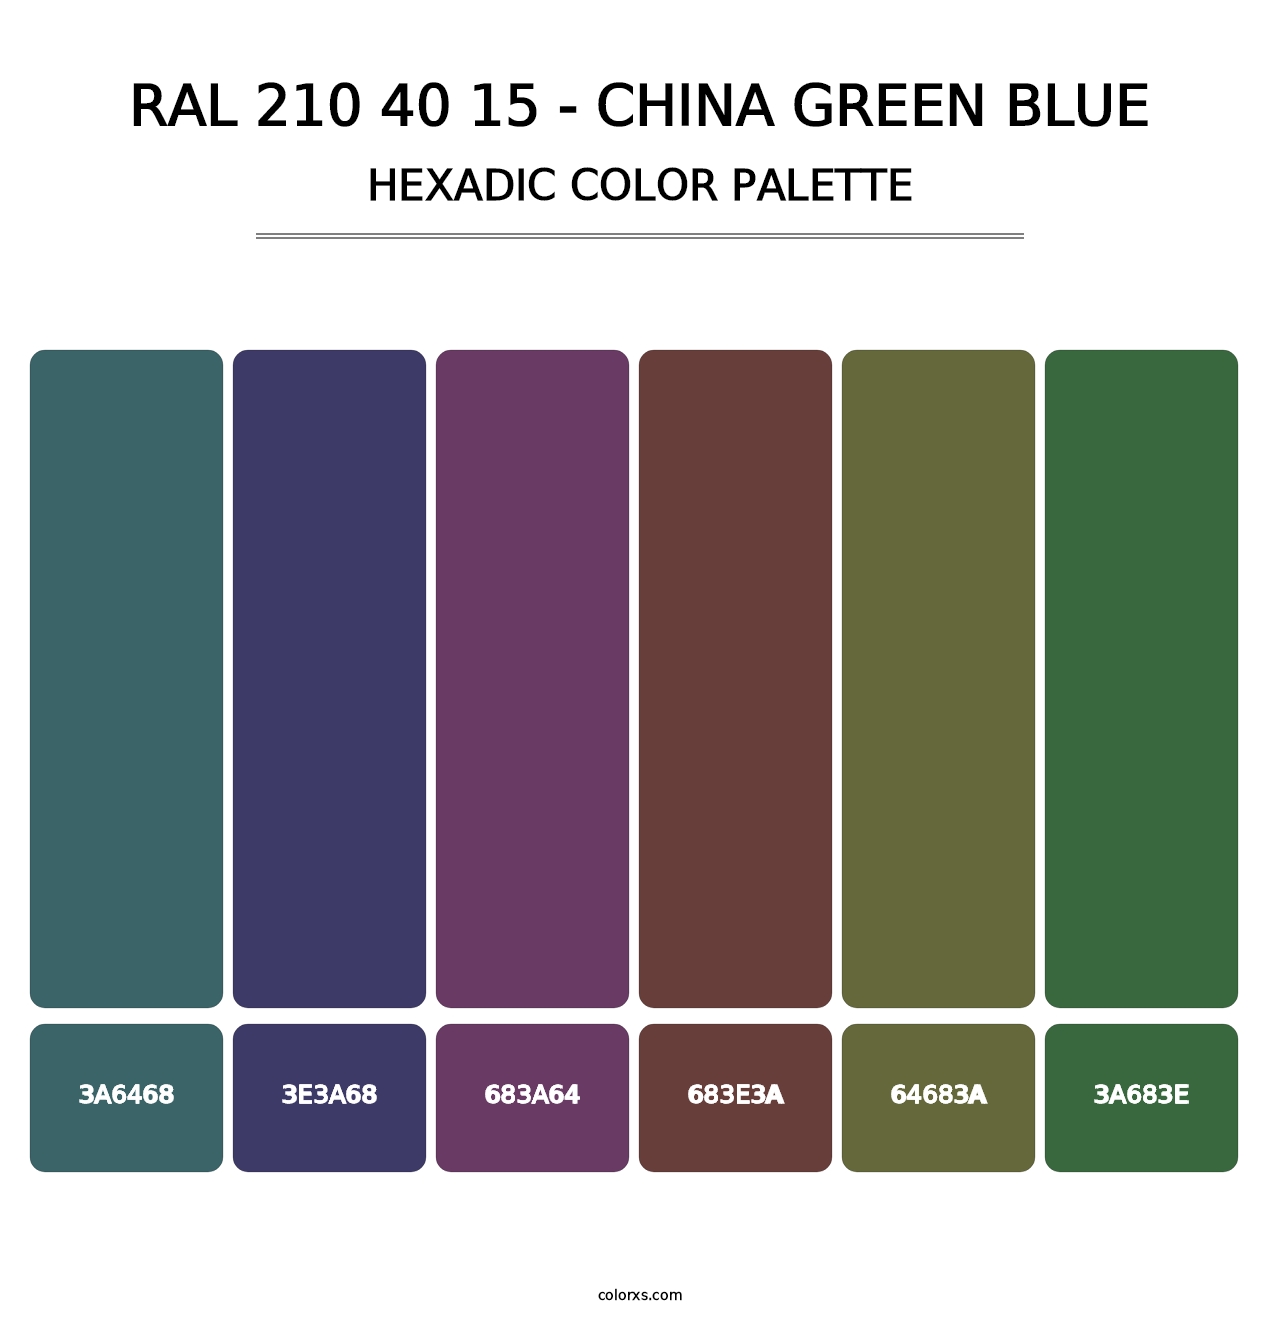 RAL 210 40 15 - China Green Blue - Hexadic Color Palette